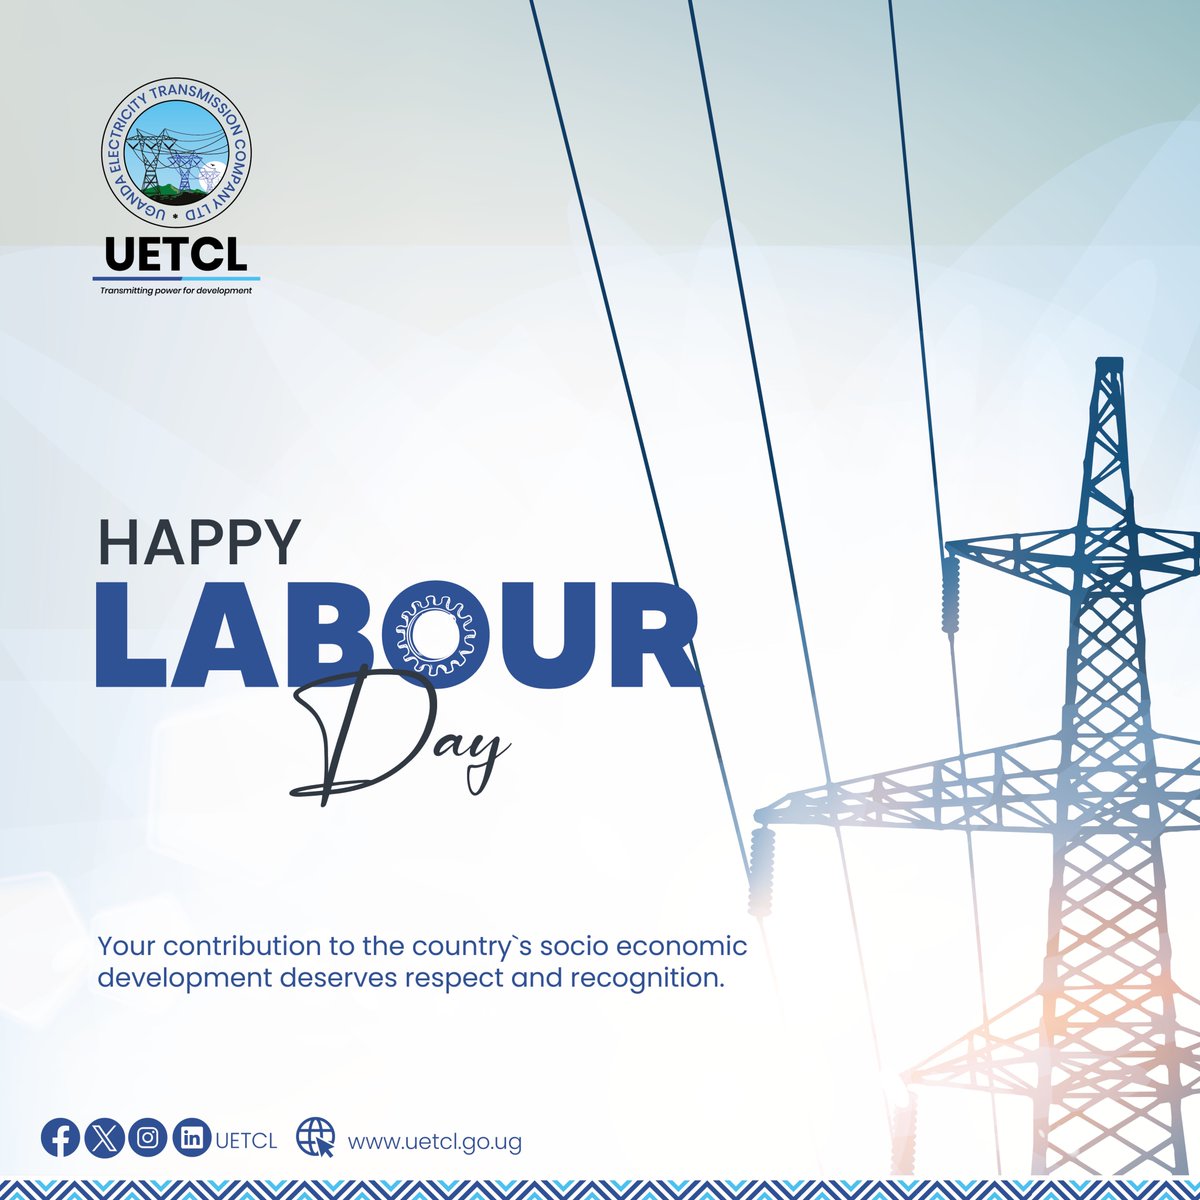 For your great contribution to the country's socio-economic development, we celebrate you. #HappyLabourDay!